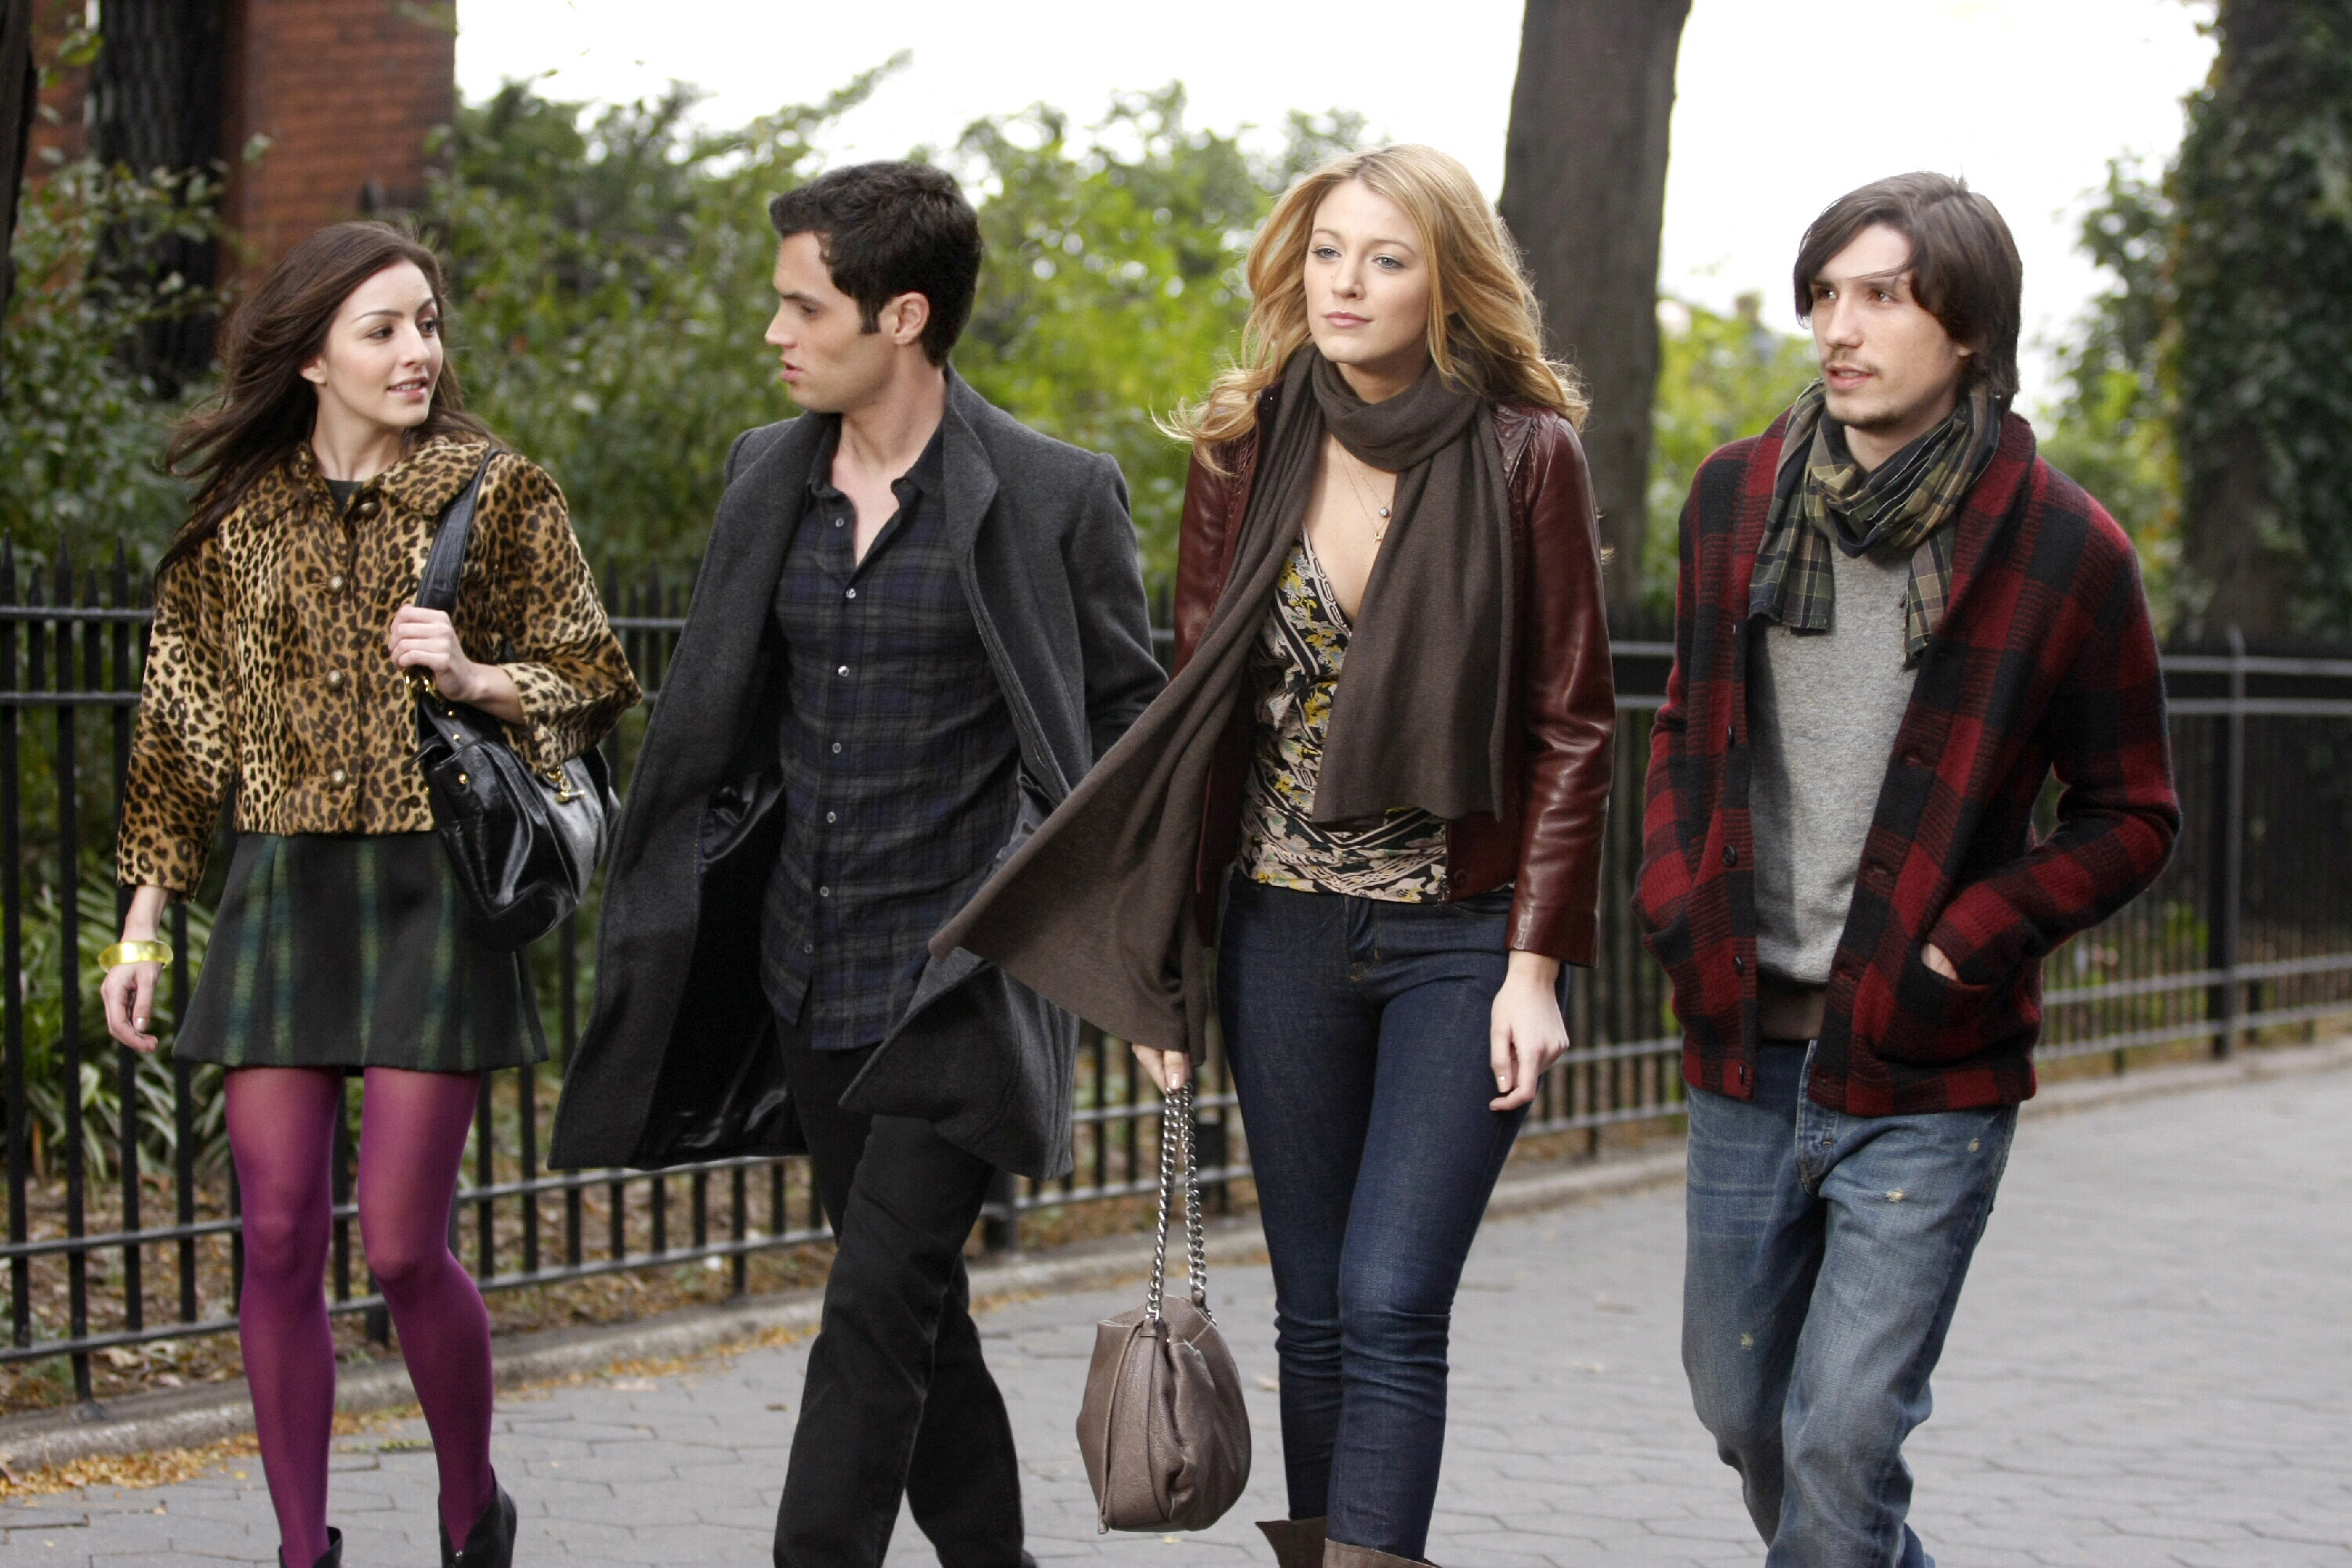 Four characters in Gossip Girl walk side-by-side in the park